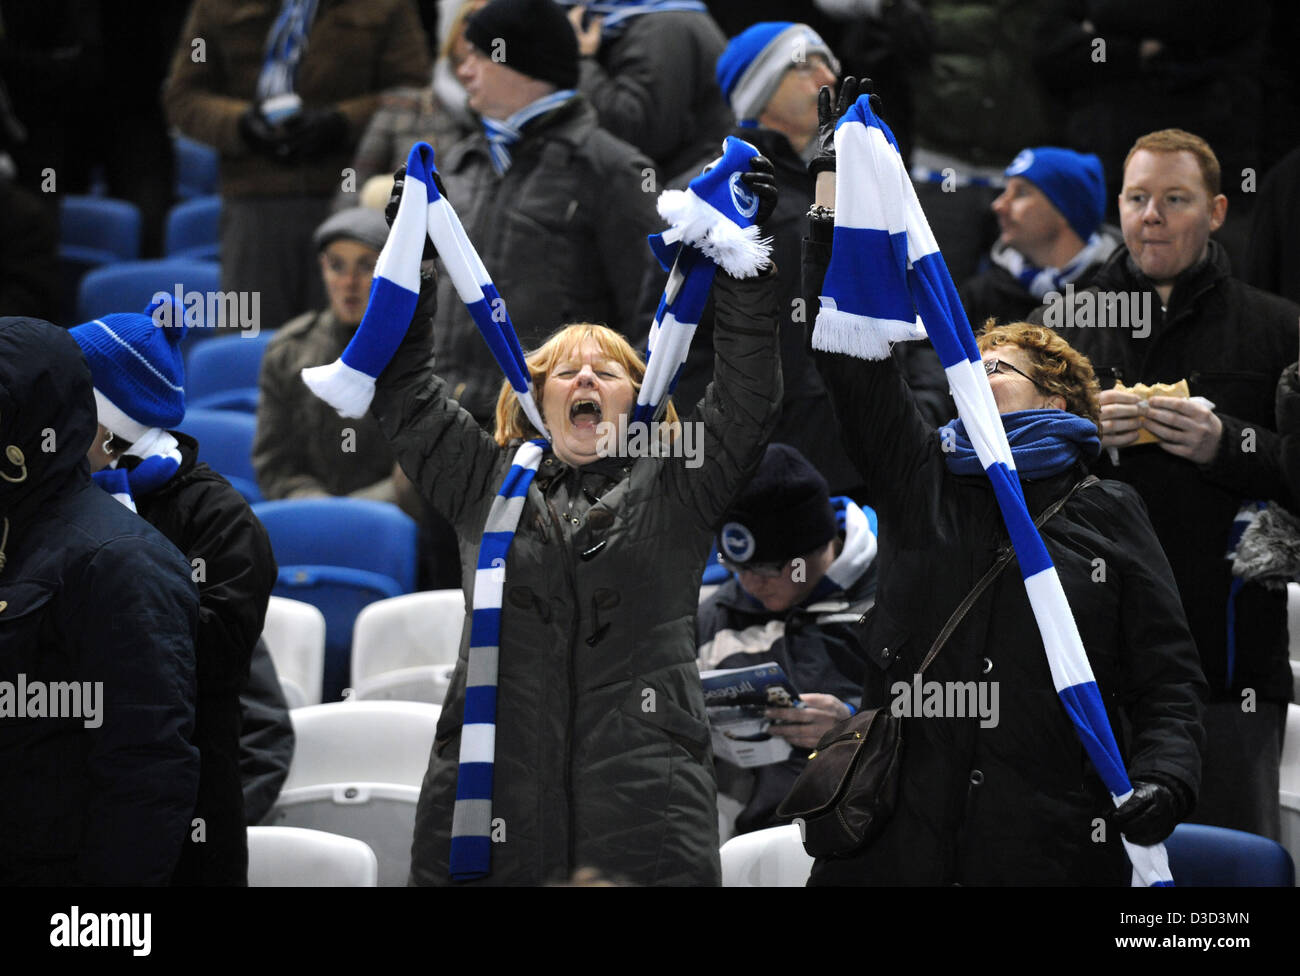 Femme Brighton et Hove Albion football fan cheering at un match forme foulard Banque D'Images